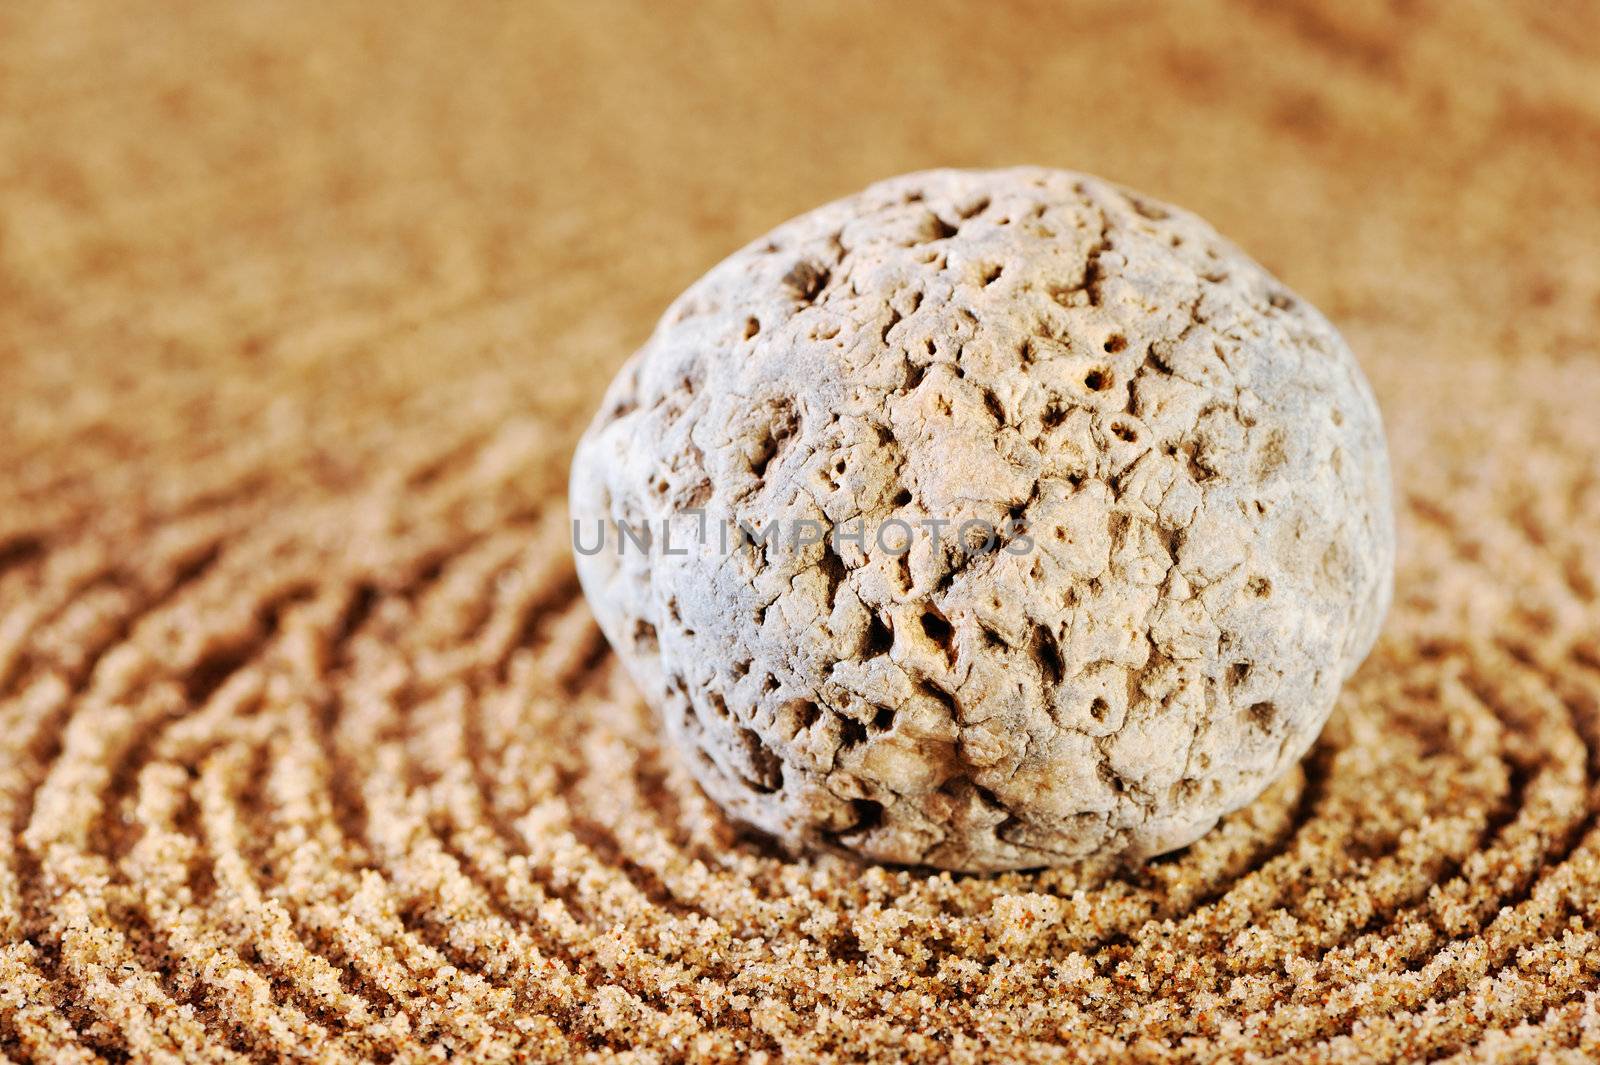 Sea sand and stone in the summer morning on a beach